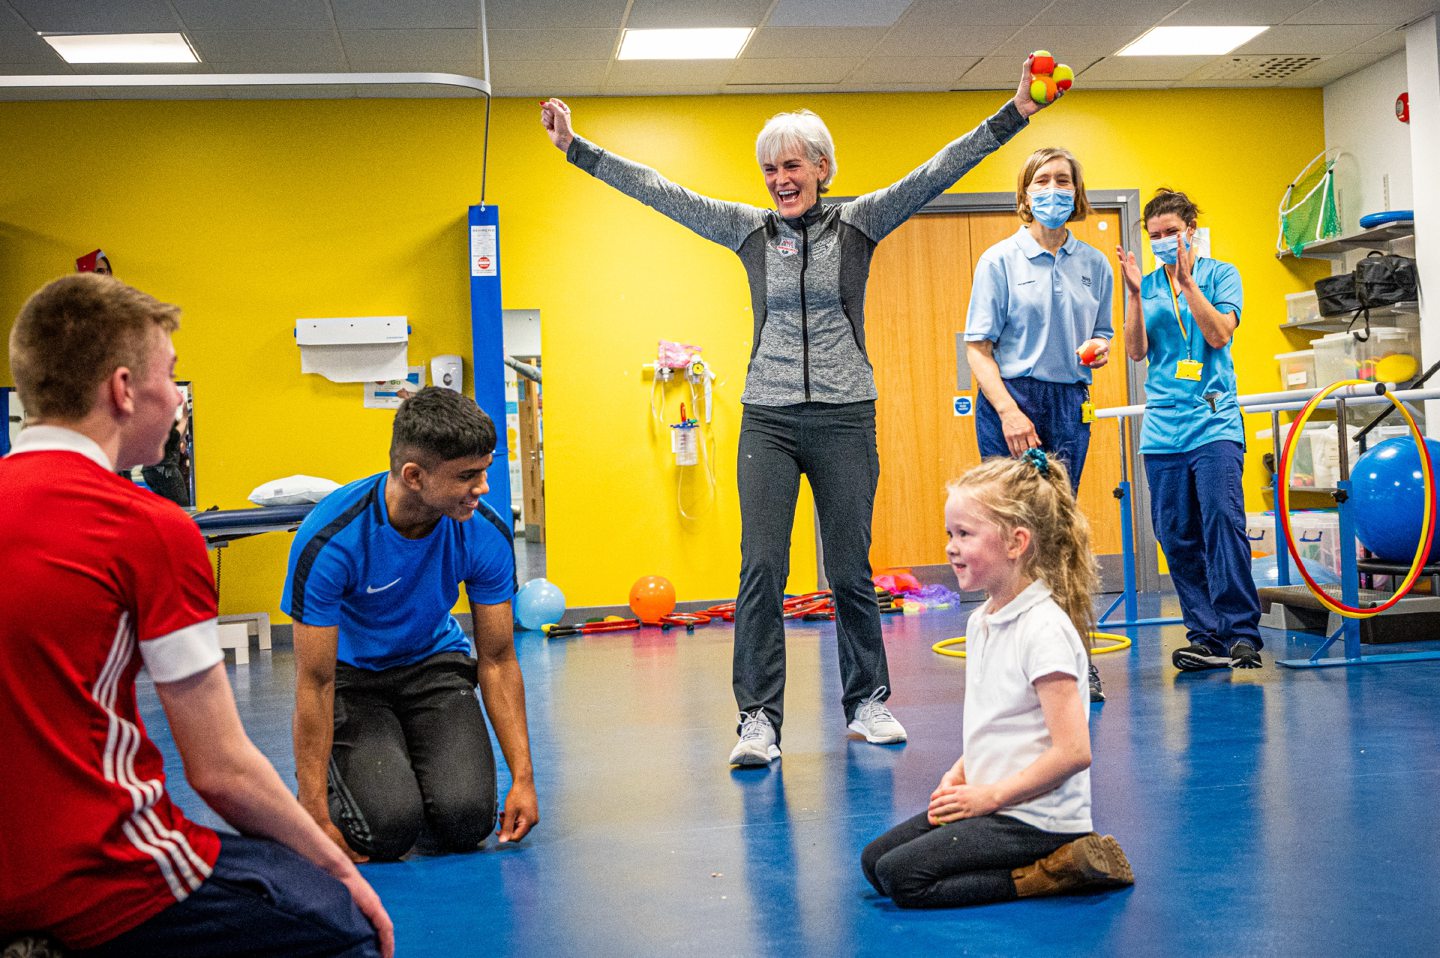 It was a good time for all during Judy Murray's training session at Royal Aberdeen Children's Hospital. Image: Wullie Marr / DC Thomson